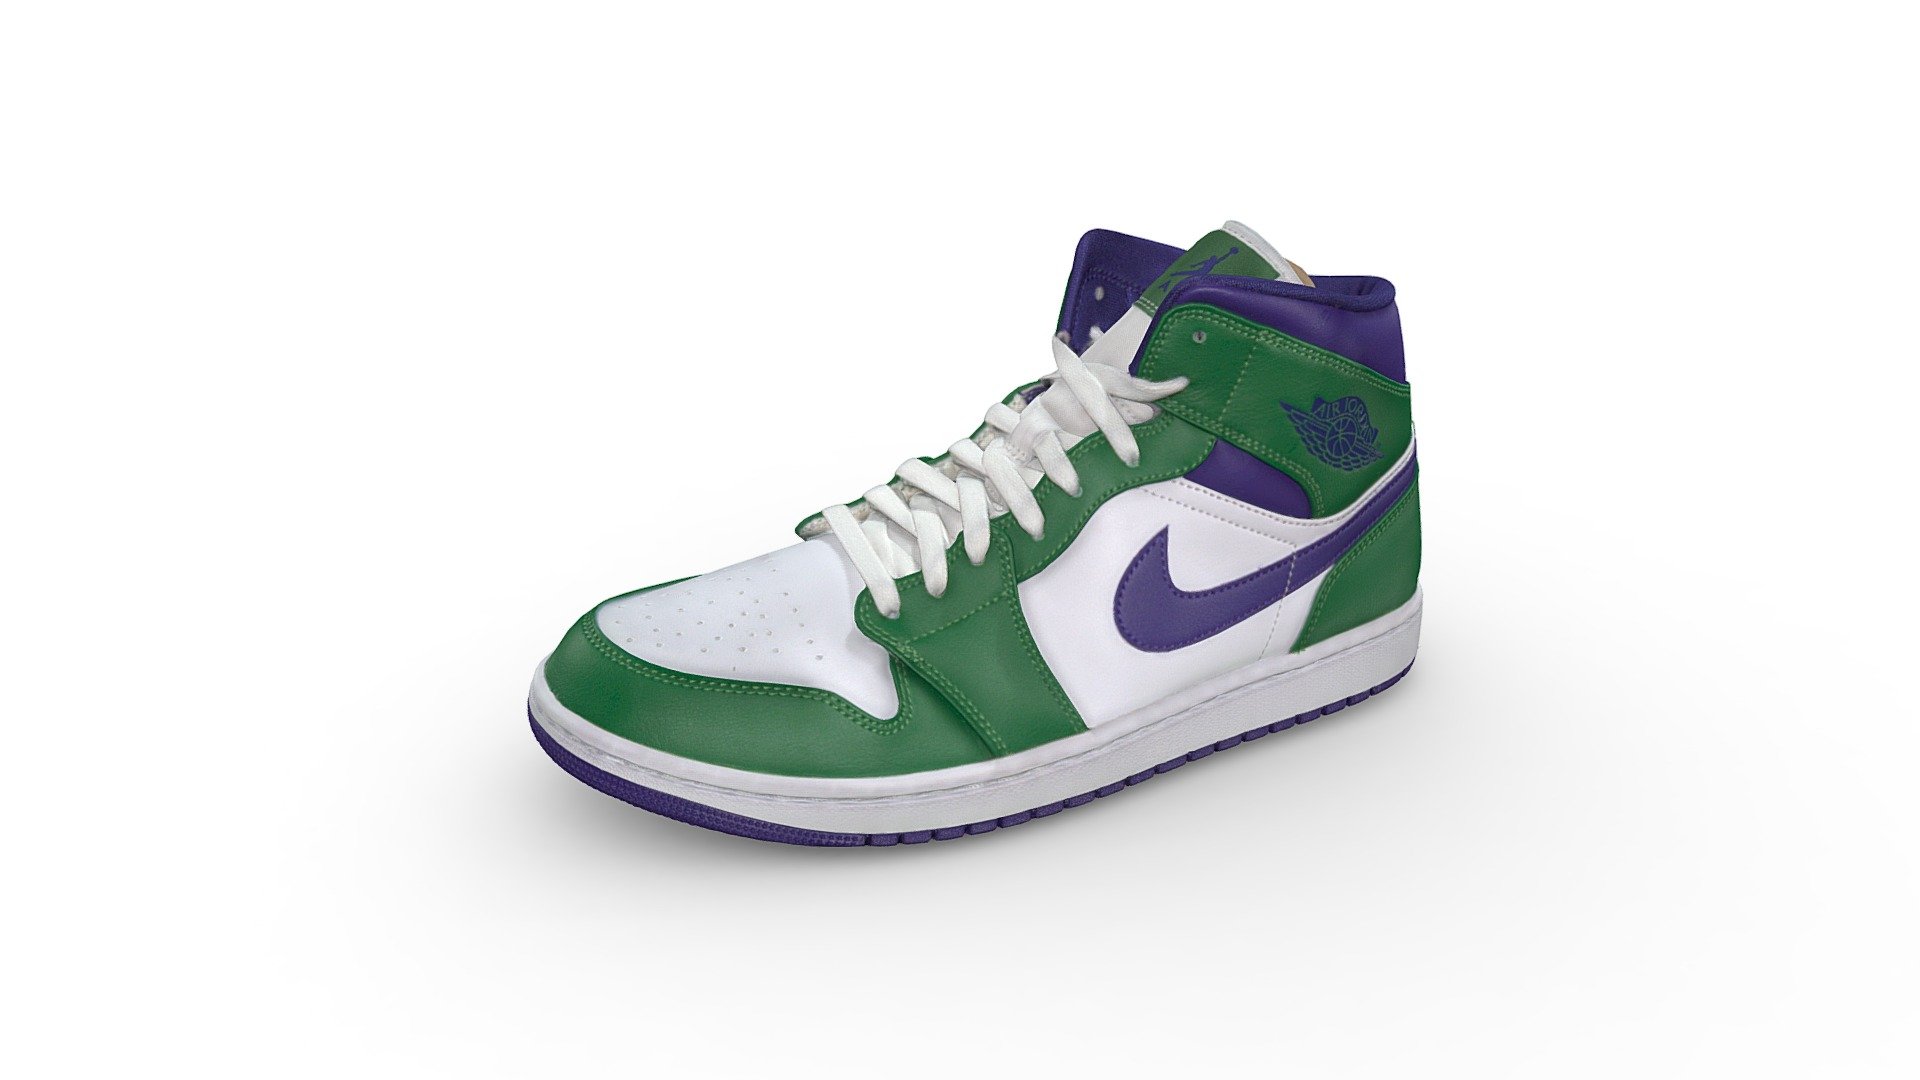 3D Scan of a Nike Jordan 1 Mid Incredible Hulk

The Air Jordan 1s almost didn’t get off the ground as NBA commissioner David Stern threatened to fine Jordan for wearing them since they did not meet the league’s strict standards. These Jordan shoes received the nickname “Notorious” because of the controversy. Jordan continued to wear them, however, and their popularity led to the release of the Air Jordan 2 by Nike in 1986. Through the years, Jordan retro shoes have continued their popularity thanks to a variety of designs, including the Space Jam Air Jordan, released in 1995 in conjunction with the movie. Nike reissued that style of Jordan shoe as a Retro model in 2009. New Jordans continue to be released, with the 2019 Air Jordan Bred 11 coming in as the best-selling sneaker in history.


Shown: Aloe Verde/White/Court Purple
Style: 554724-300
 - Nike Air Jordan 1 Mid Incredible Hulk - Buy Royalty Free 3D model by chrisprice 3d model